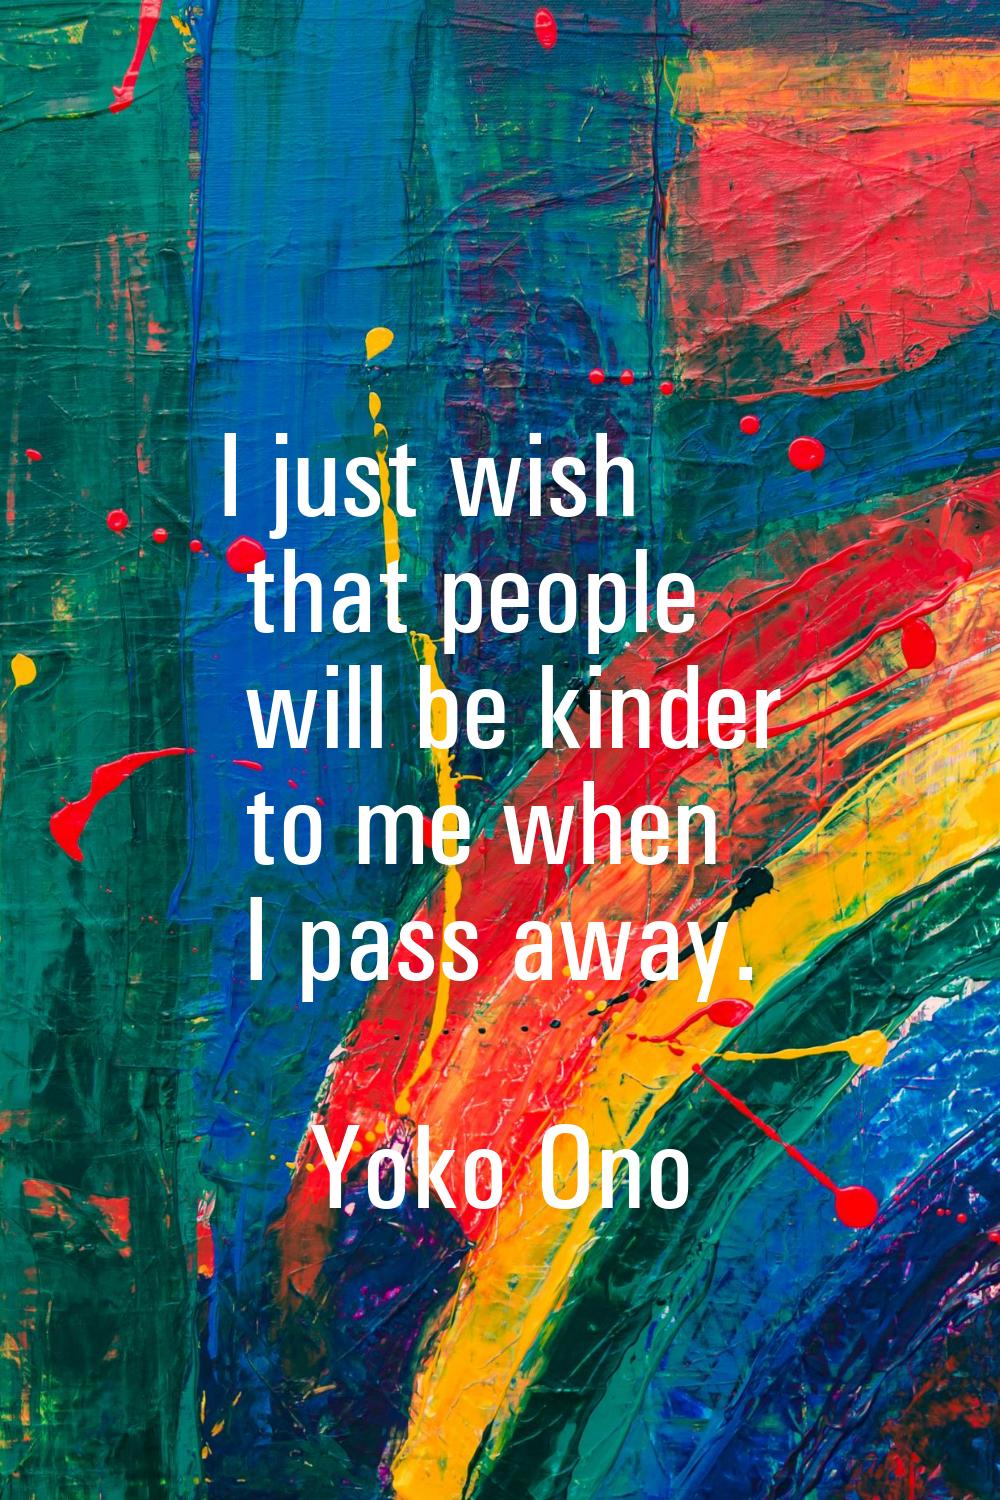 I just wish that people will be kinder to me when I pass away.